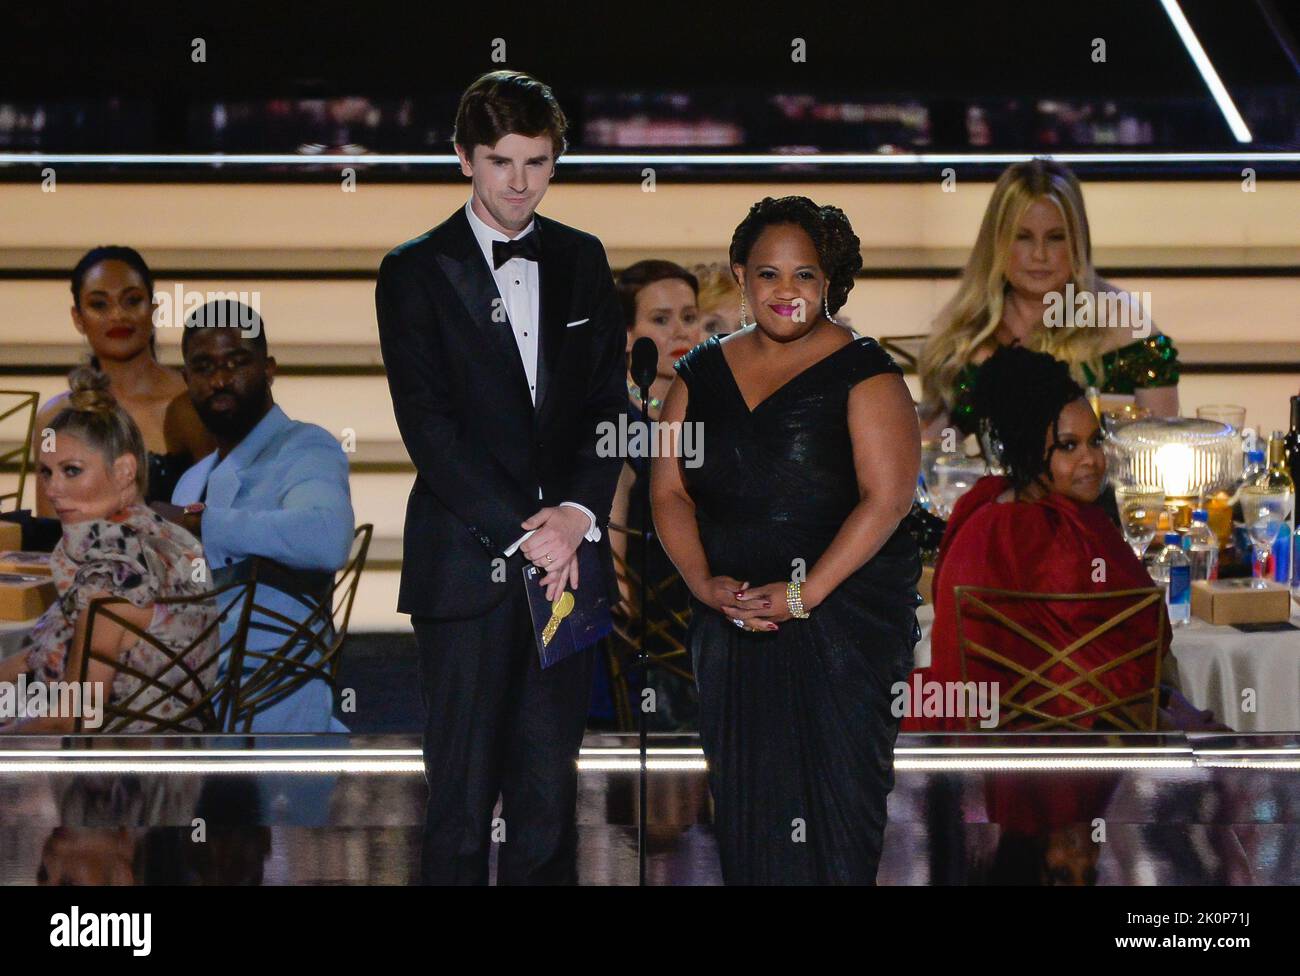 Los Angeles, United States. 12th Sep, 2022. (L-R) Freddie Highmore and Chandra Wilson speak onstage during the 74th annual Primetime Emmy Awards at the Microsoft Theater in Los Angeles on Monday, September 12, 2022. Photo by Mike Goulding/UPI Credit: UPI/Alamy Live News Credit: UPI/Alamy Live News Credit: UPI/Alamy Live News Stock Photo